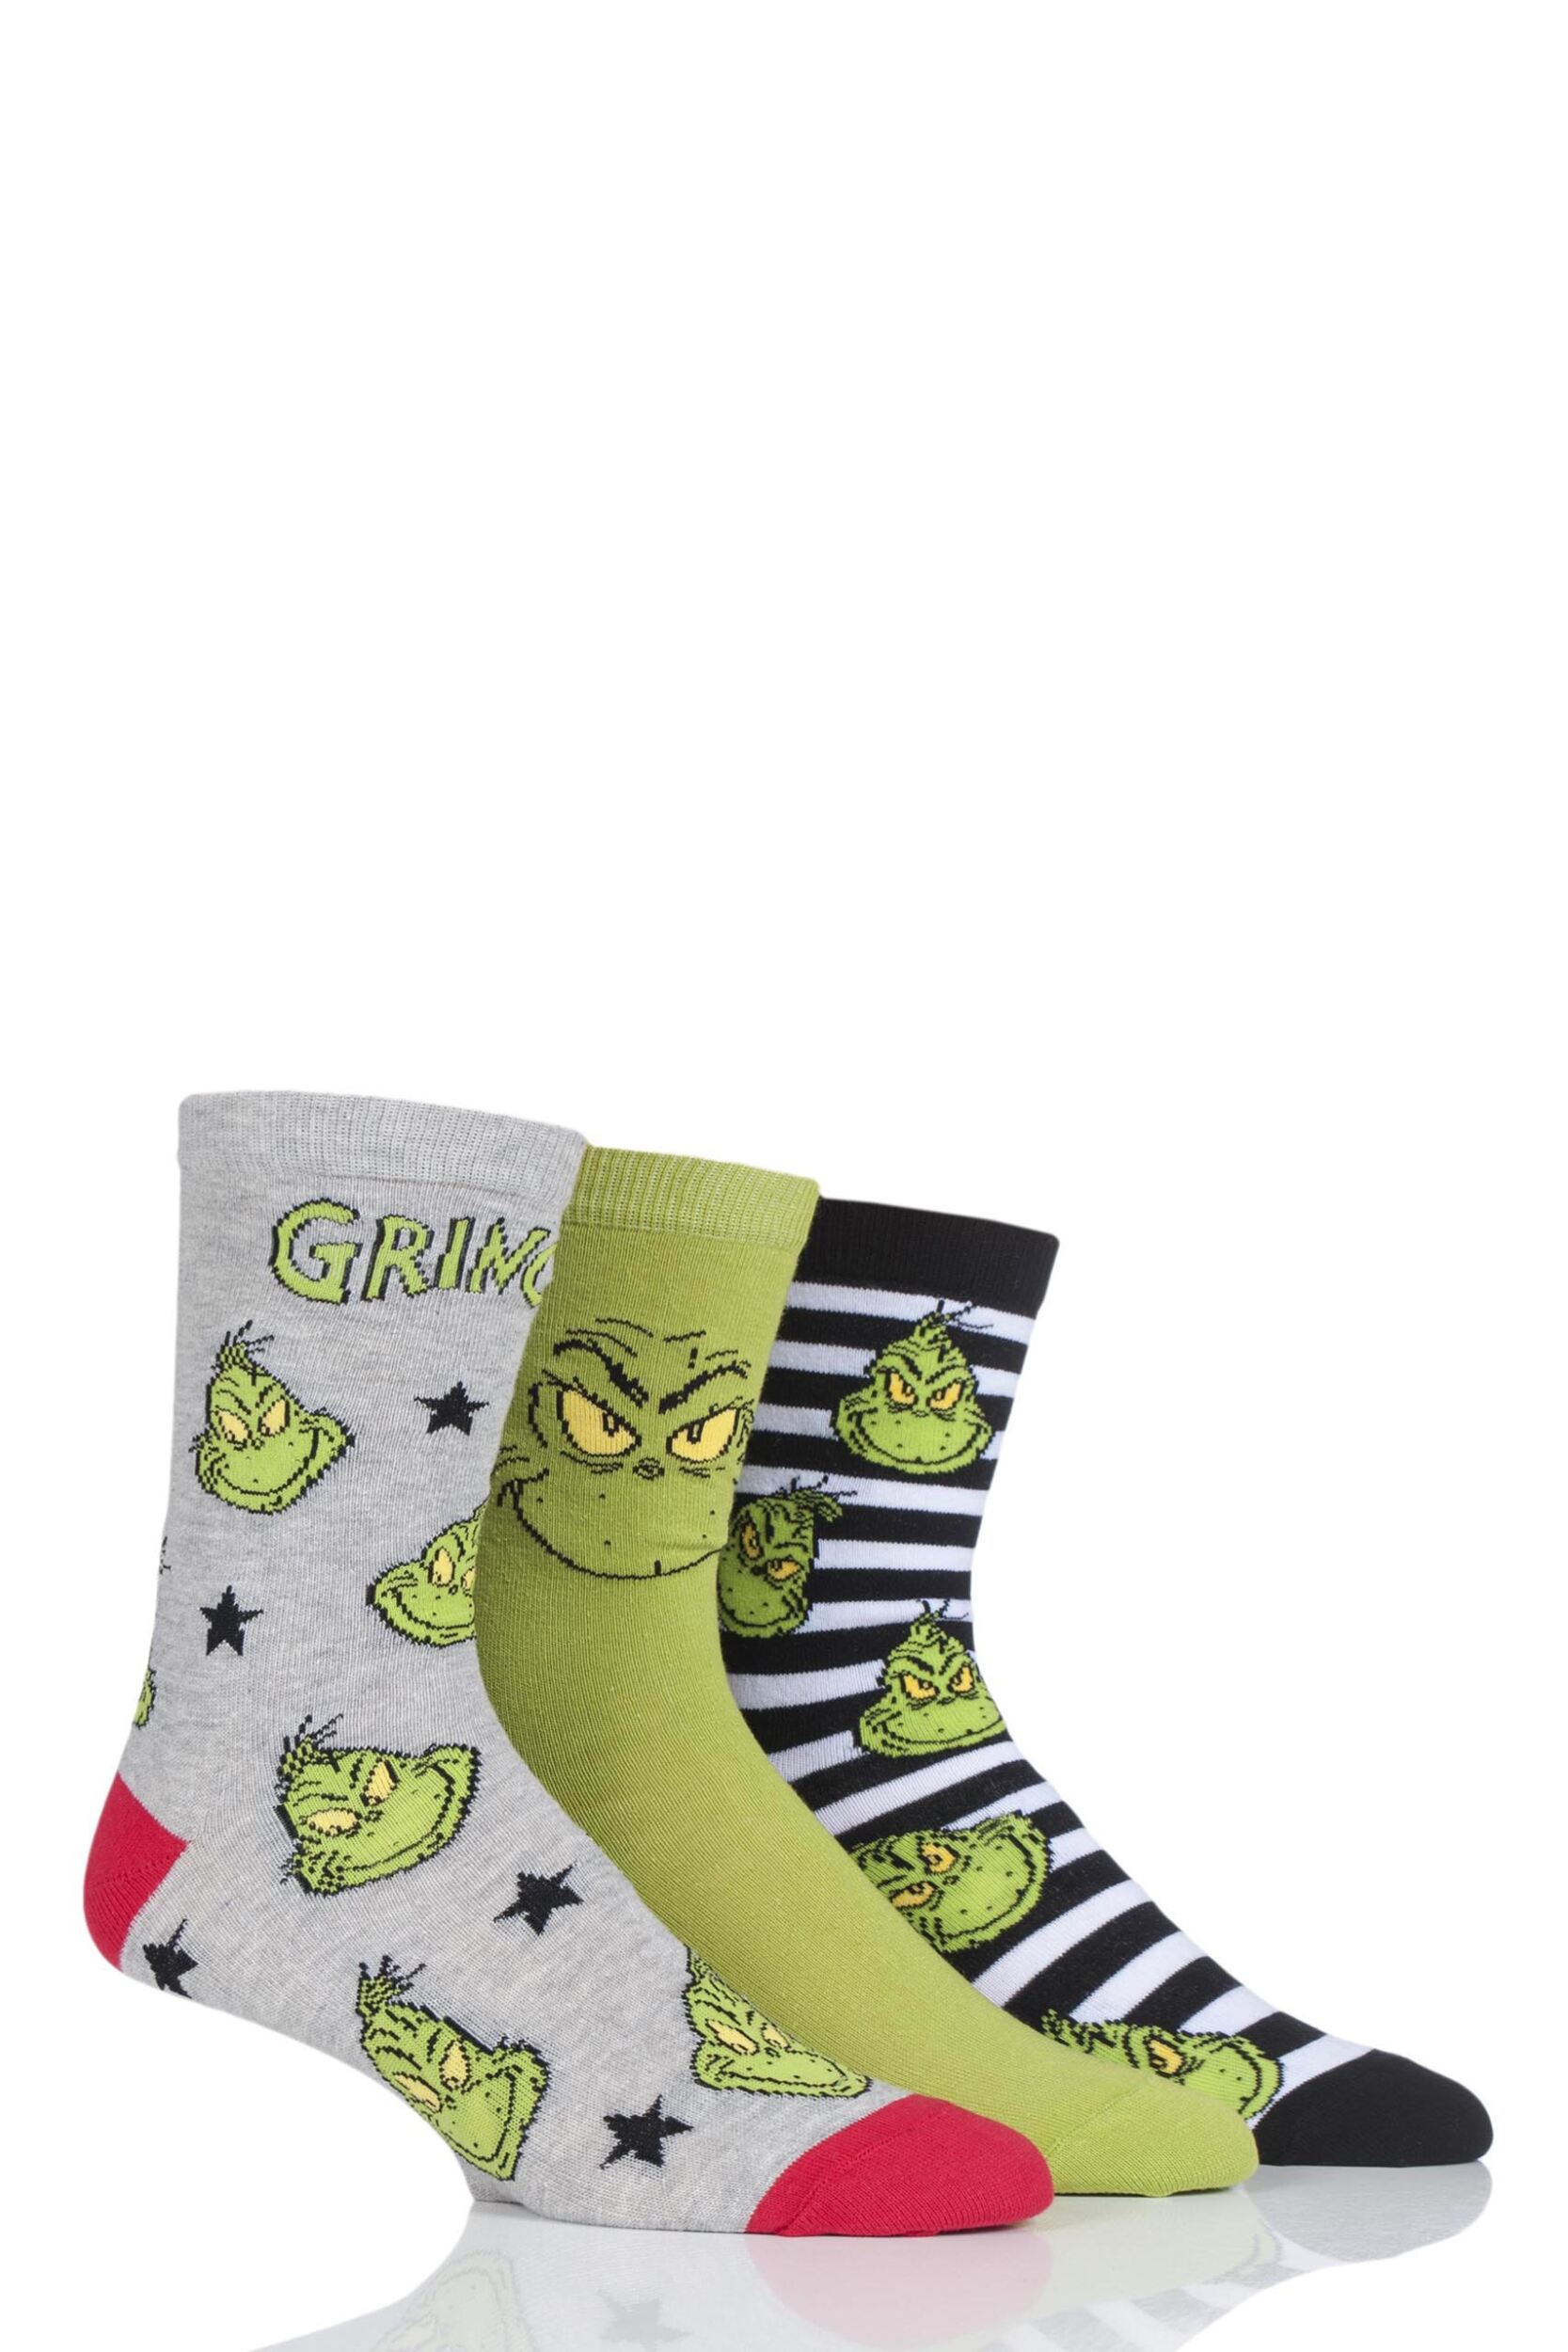 3 Pair Assorted Grinch Cotton Socks Unisex 11-13 Mens - Film & TV Characters